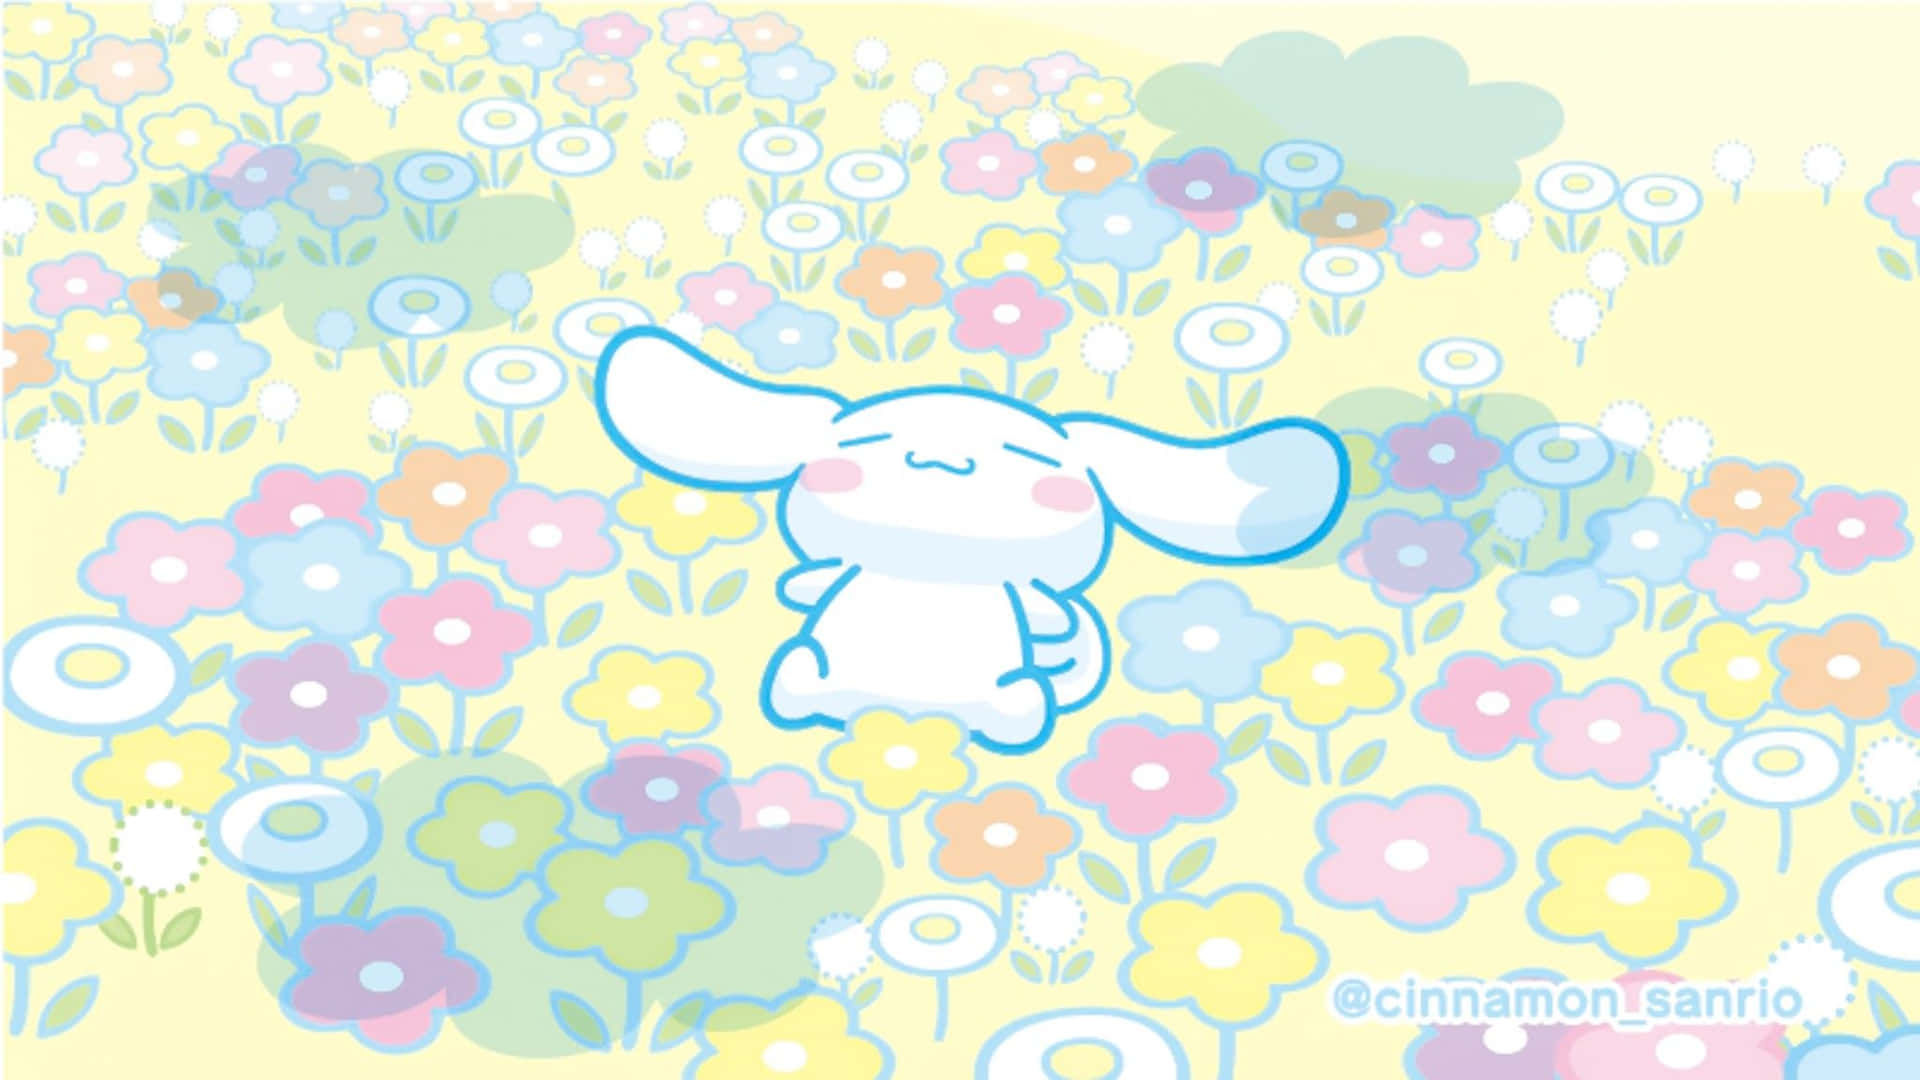 Experience Fun and Whimsy with the Cinnamoroll Laptop Wallpaper